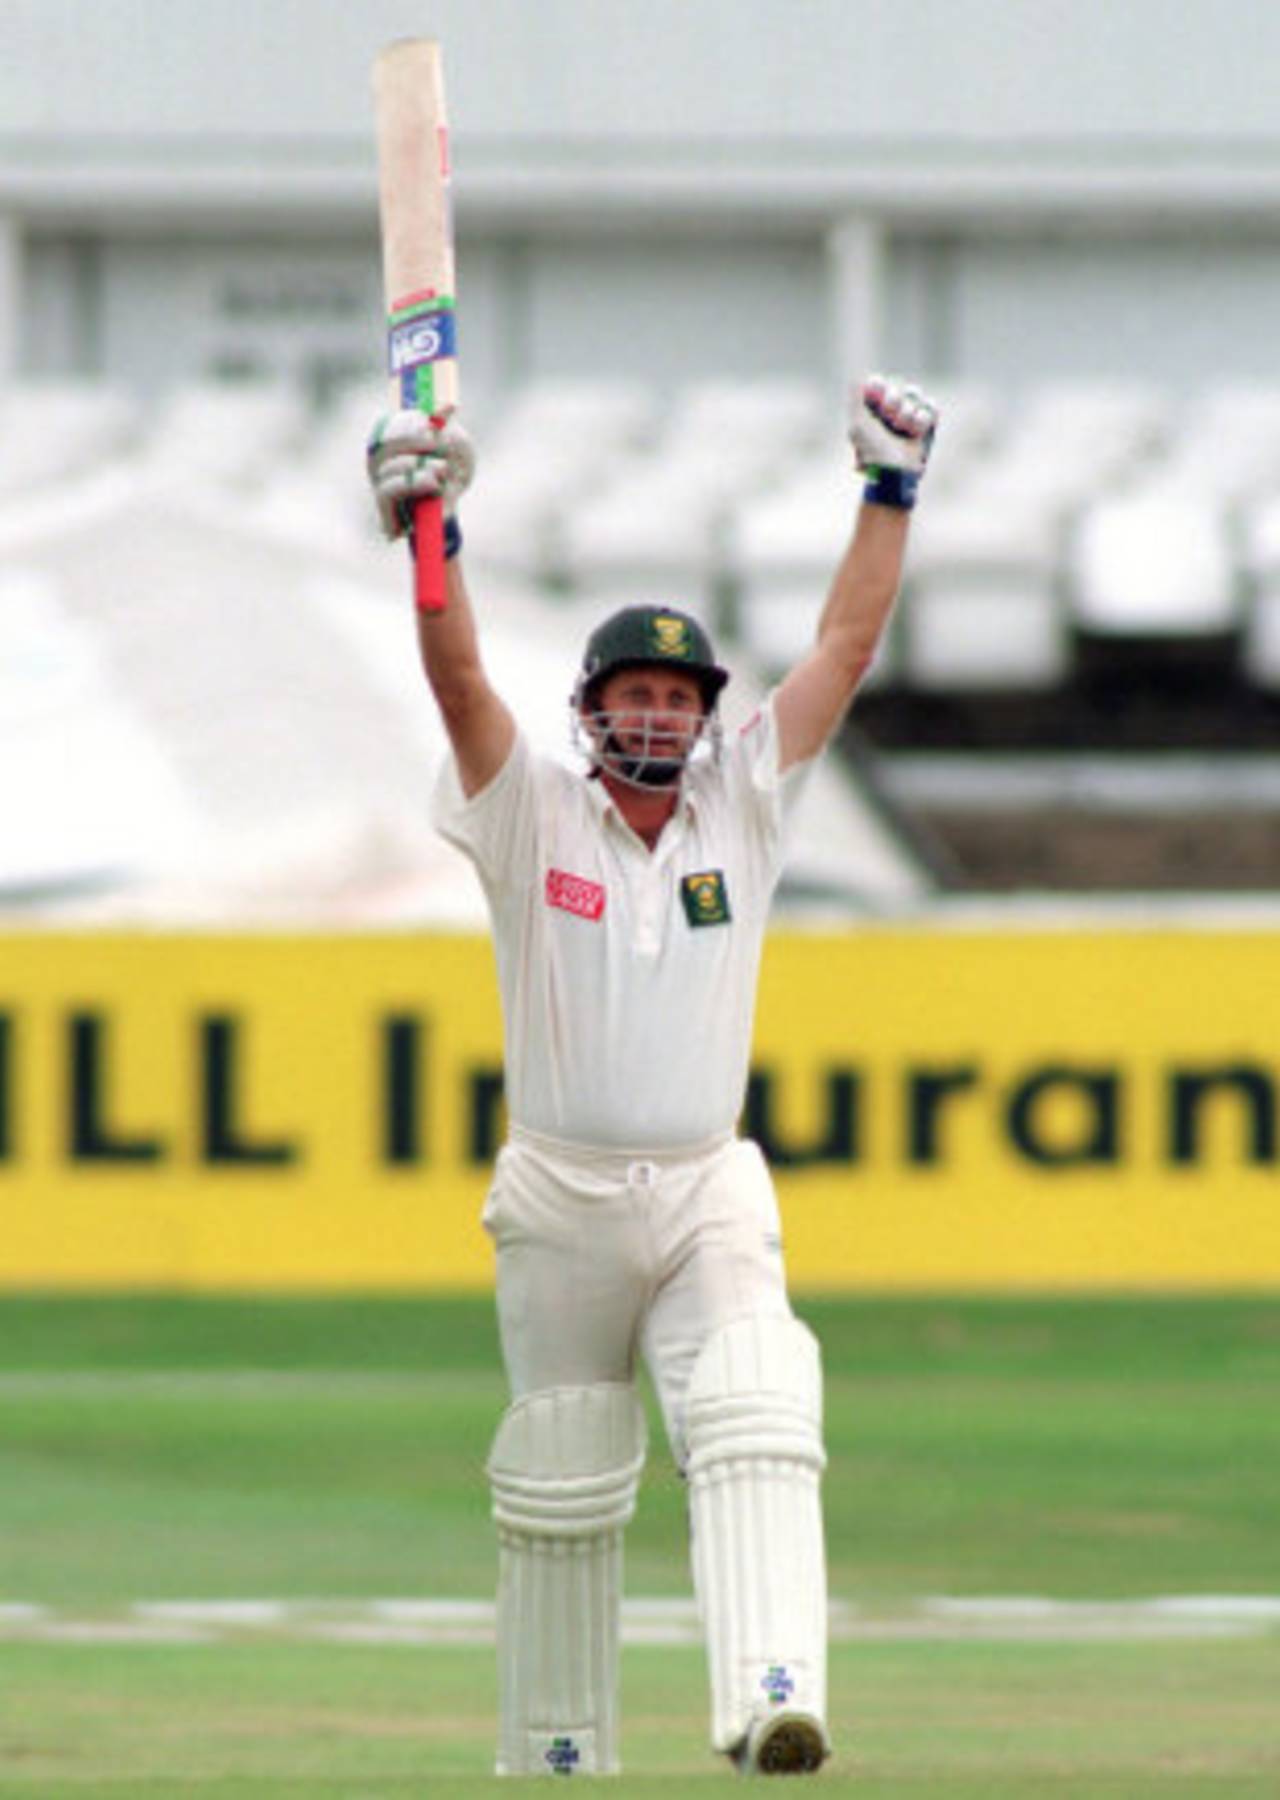 Peter Kirsten celebrates his maiden Test century, England v South Africa, 2nd Test, Headingley, 3rd day, August 6, 1994